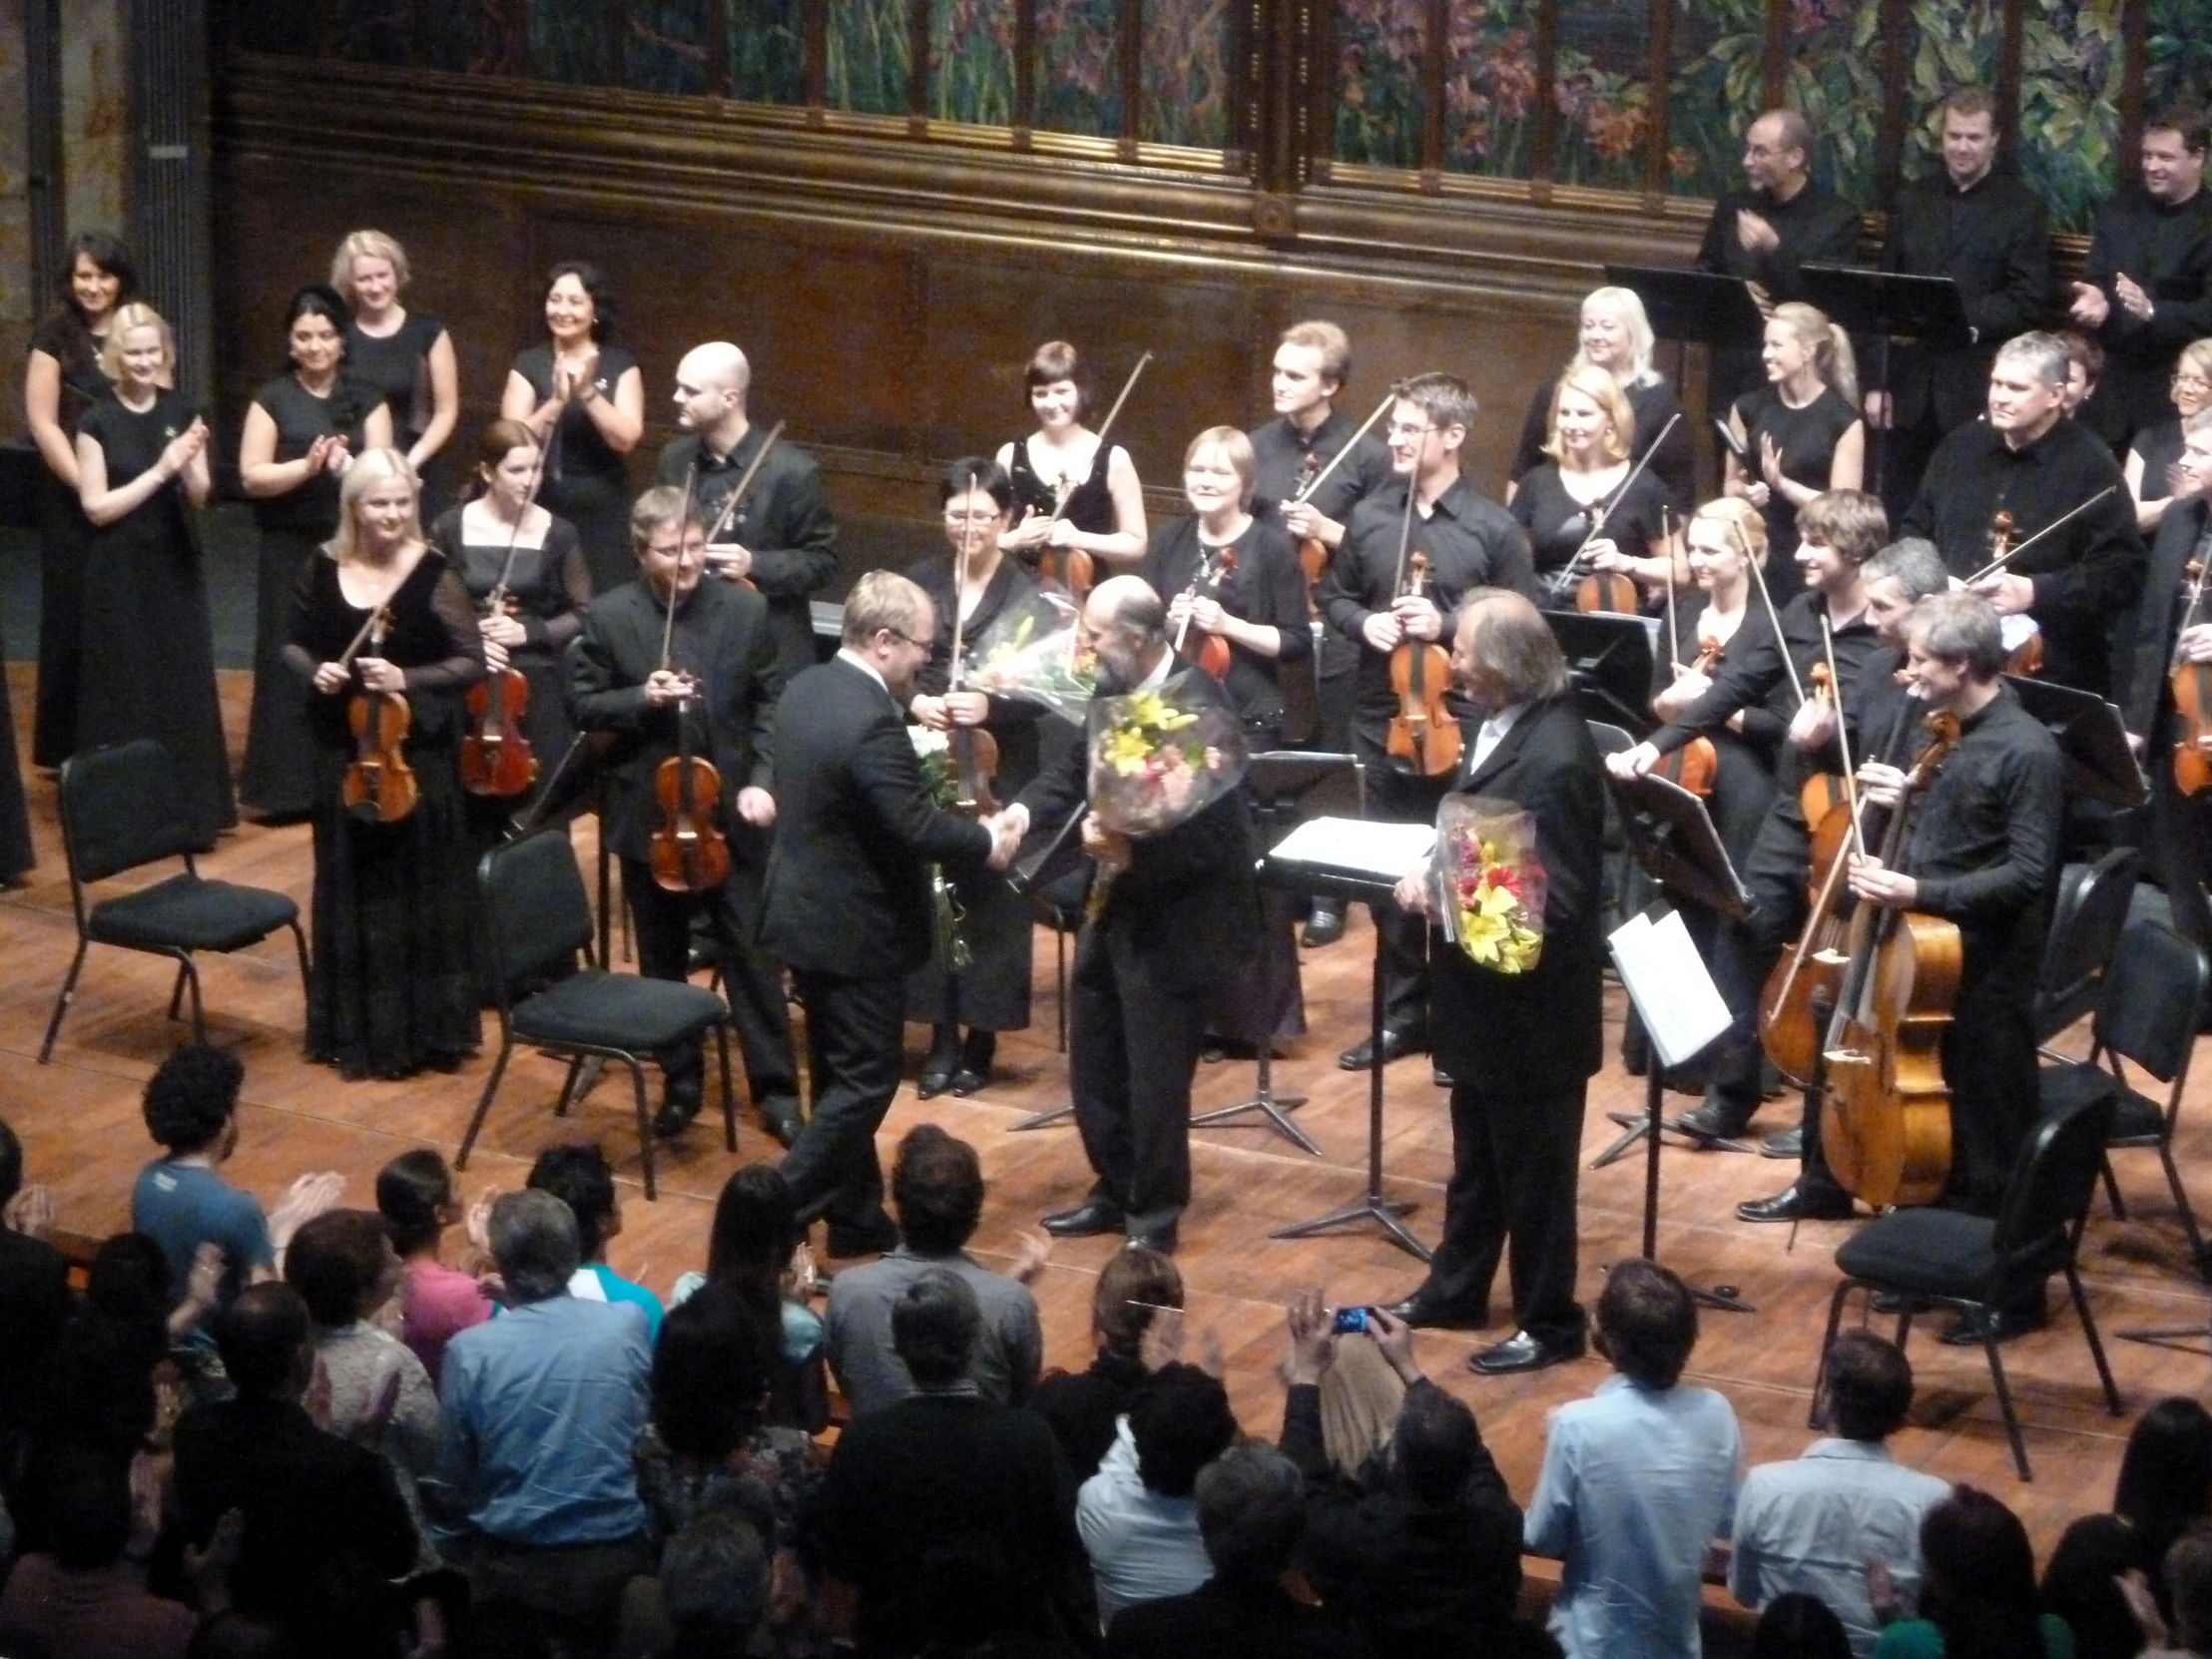 orchestra members perform on stage with conductor